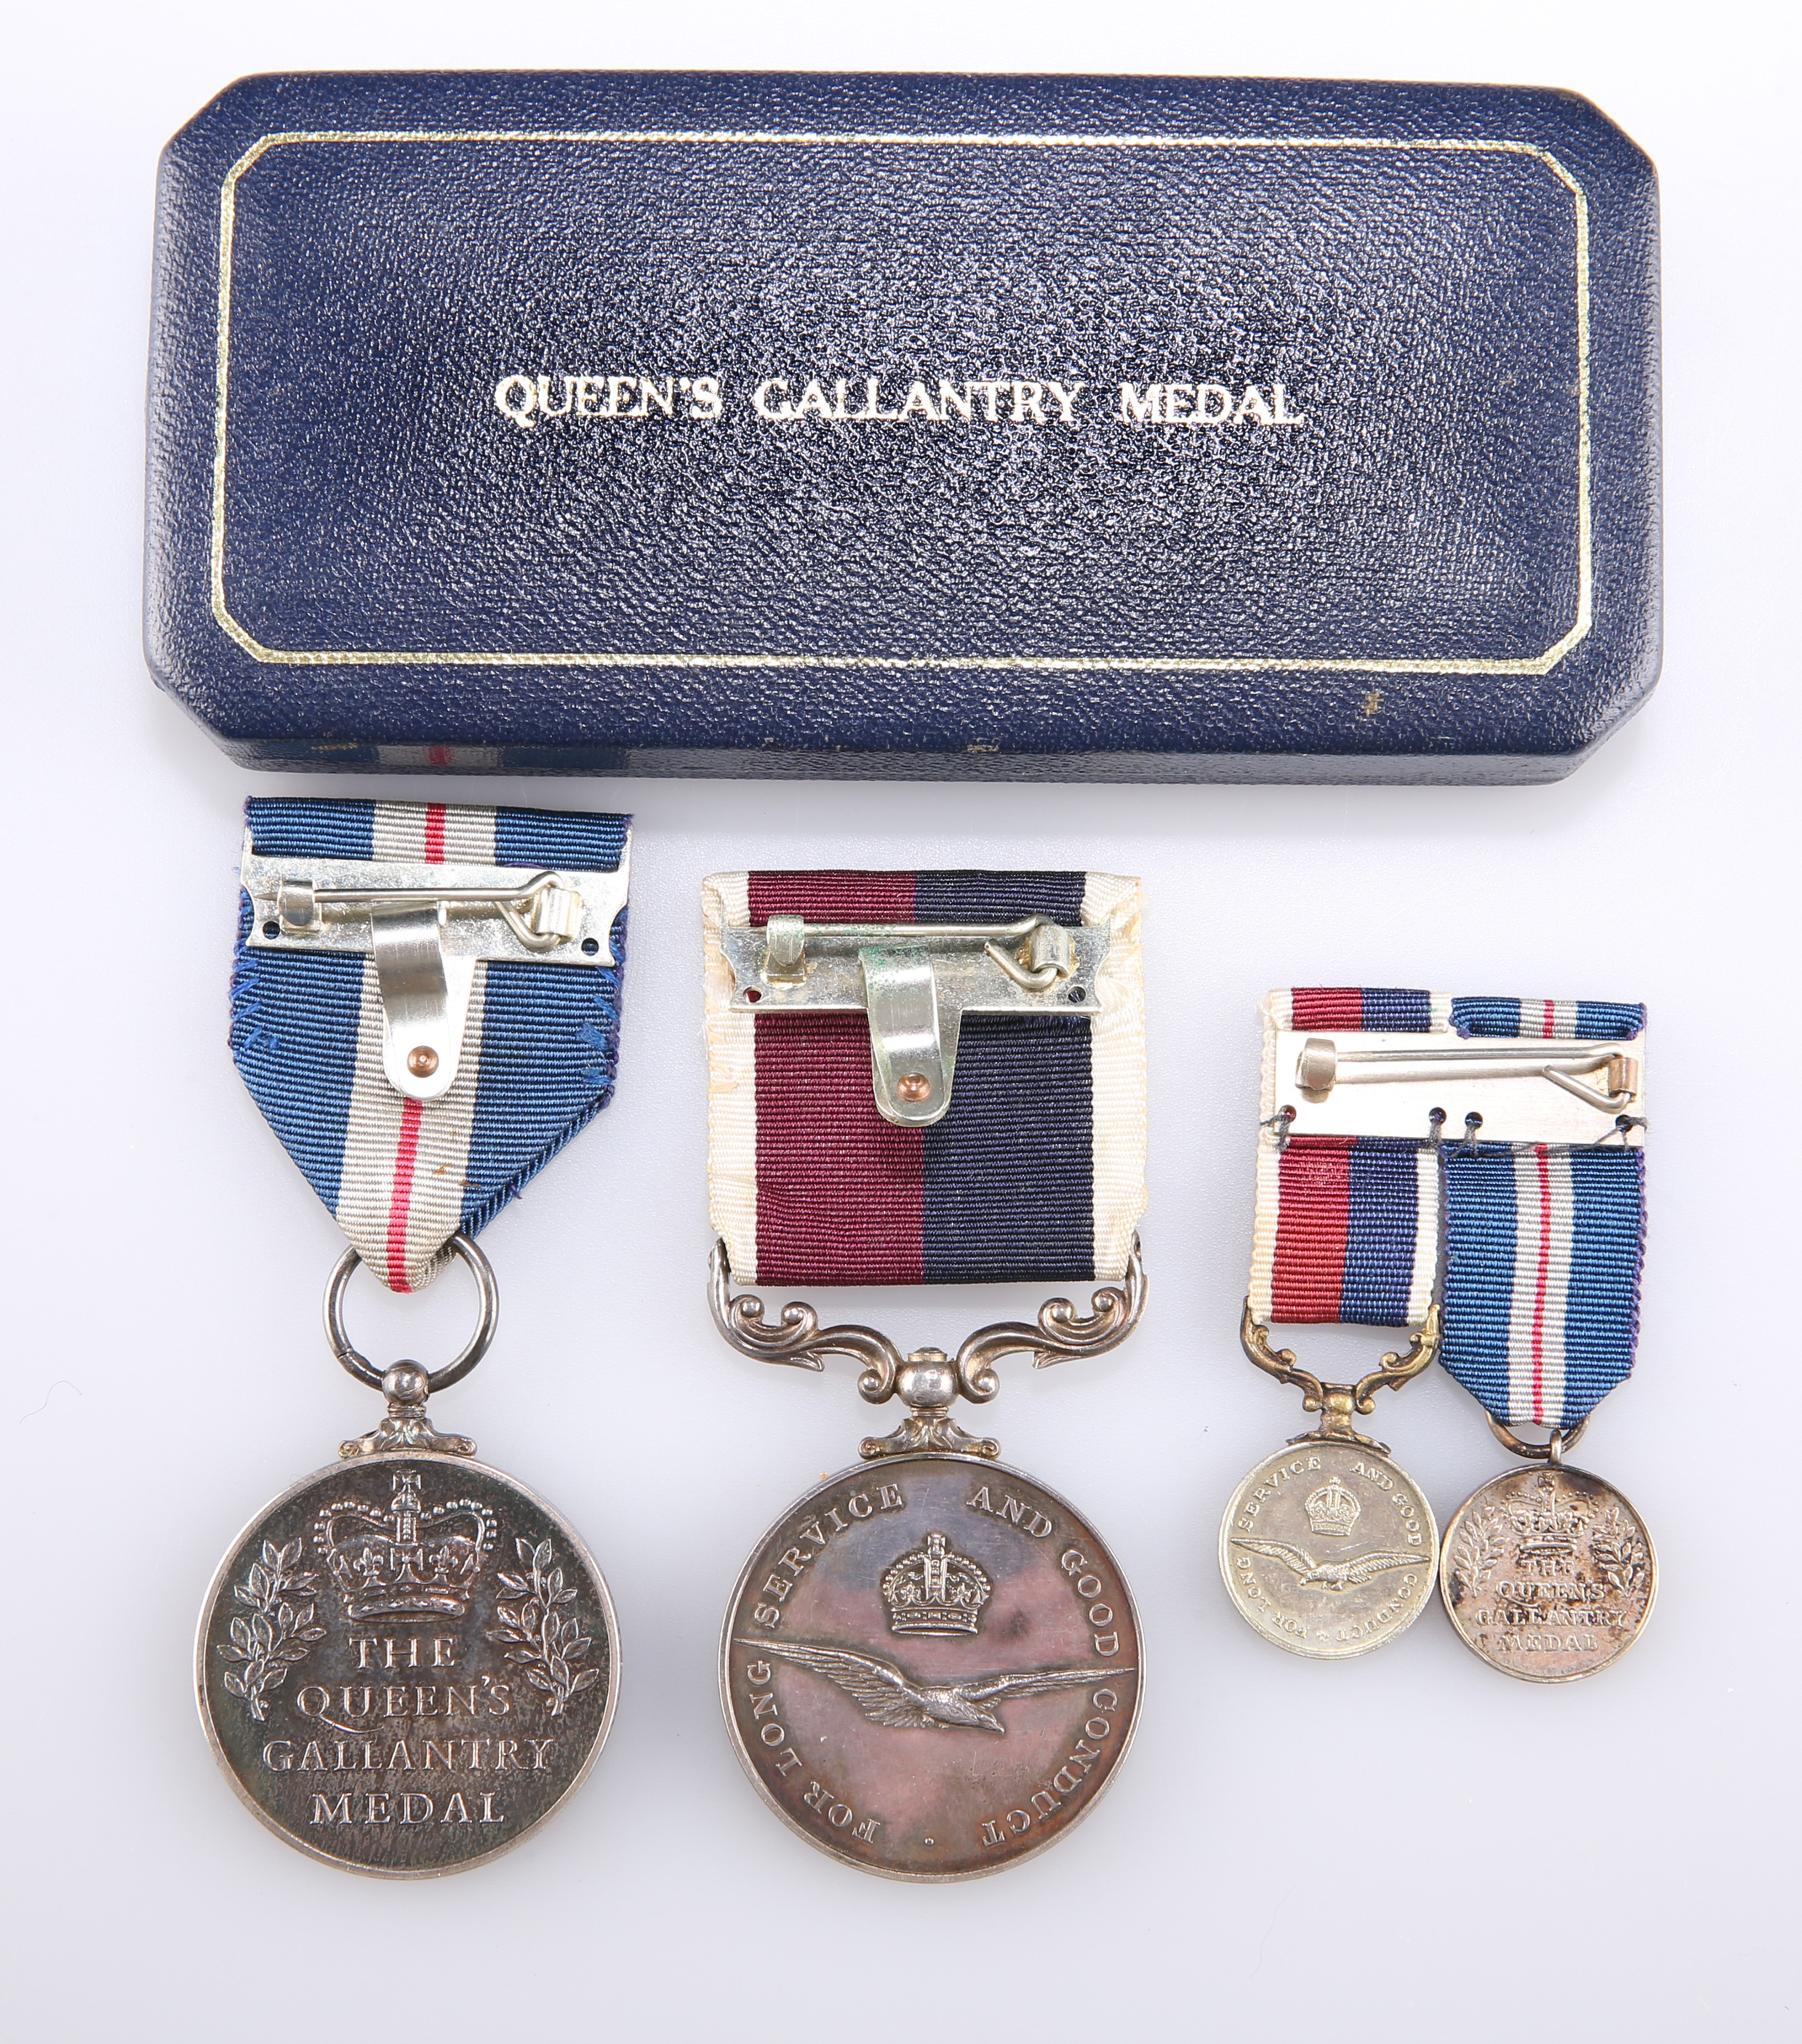 AN IMPORTANT EARLY ISSUE QUEEN'S GALLANTRY MEDAL - Image 4 of 7